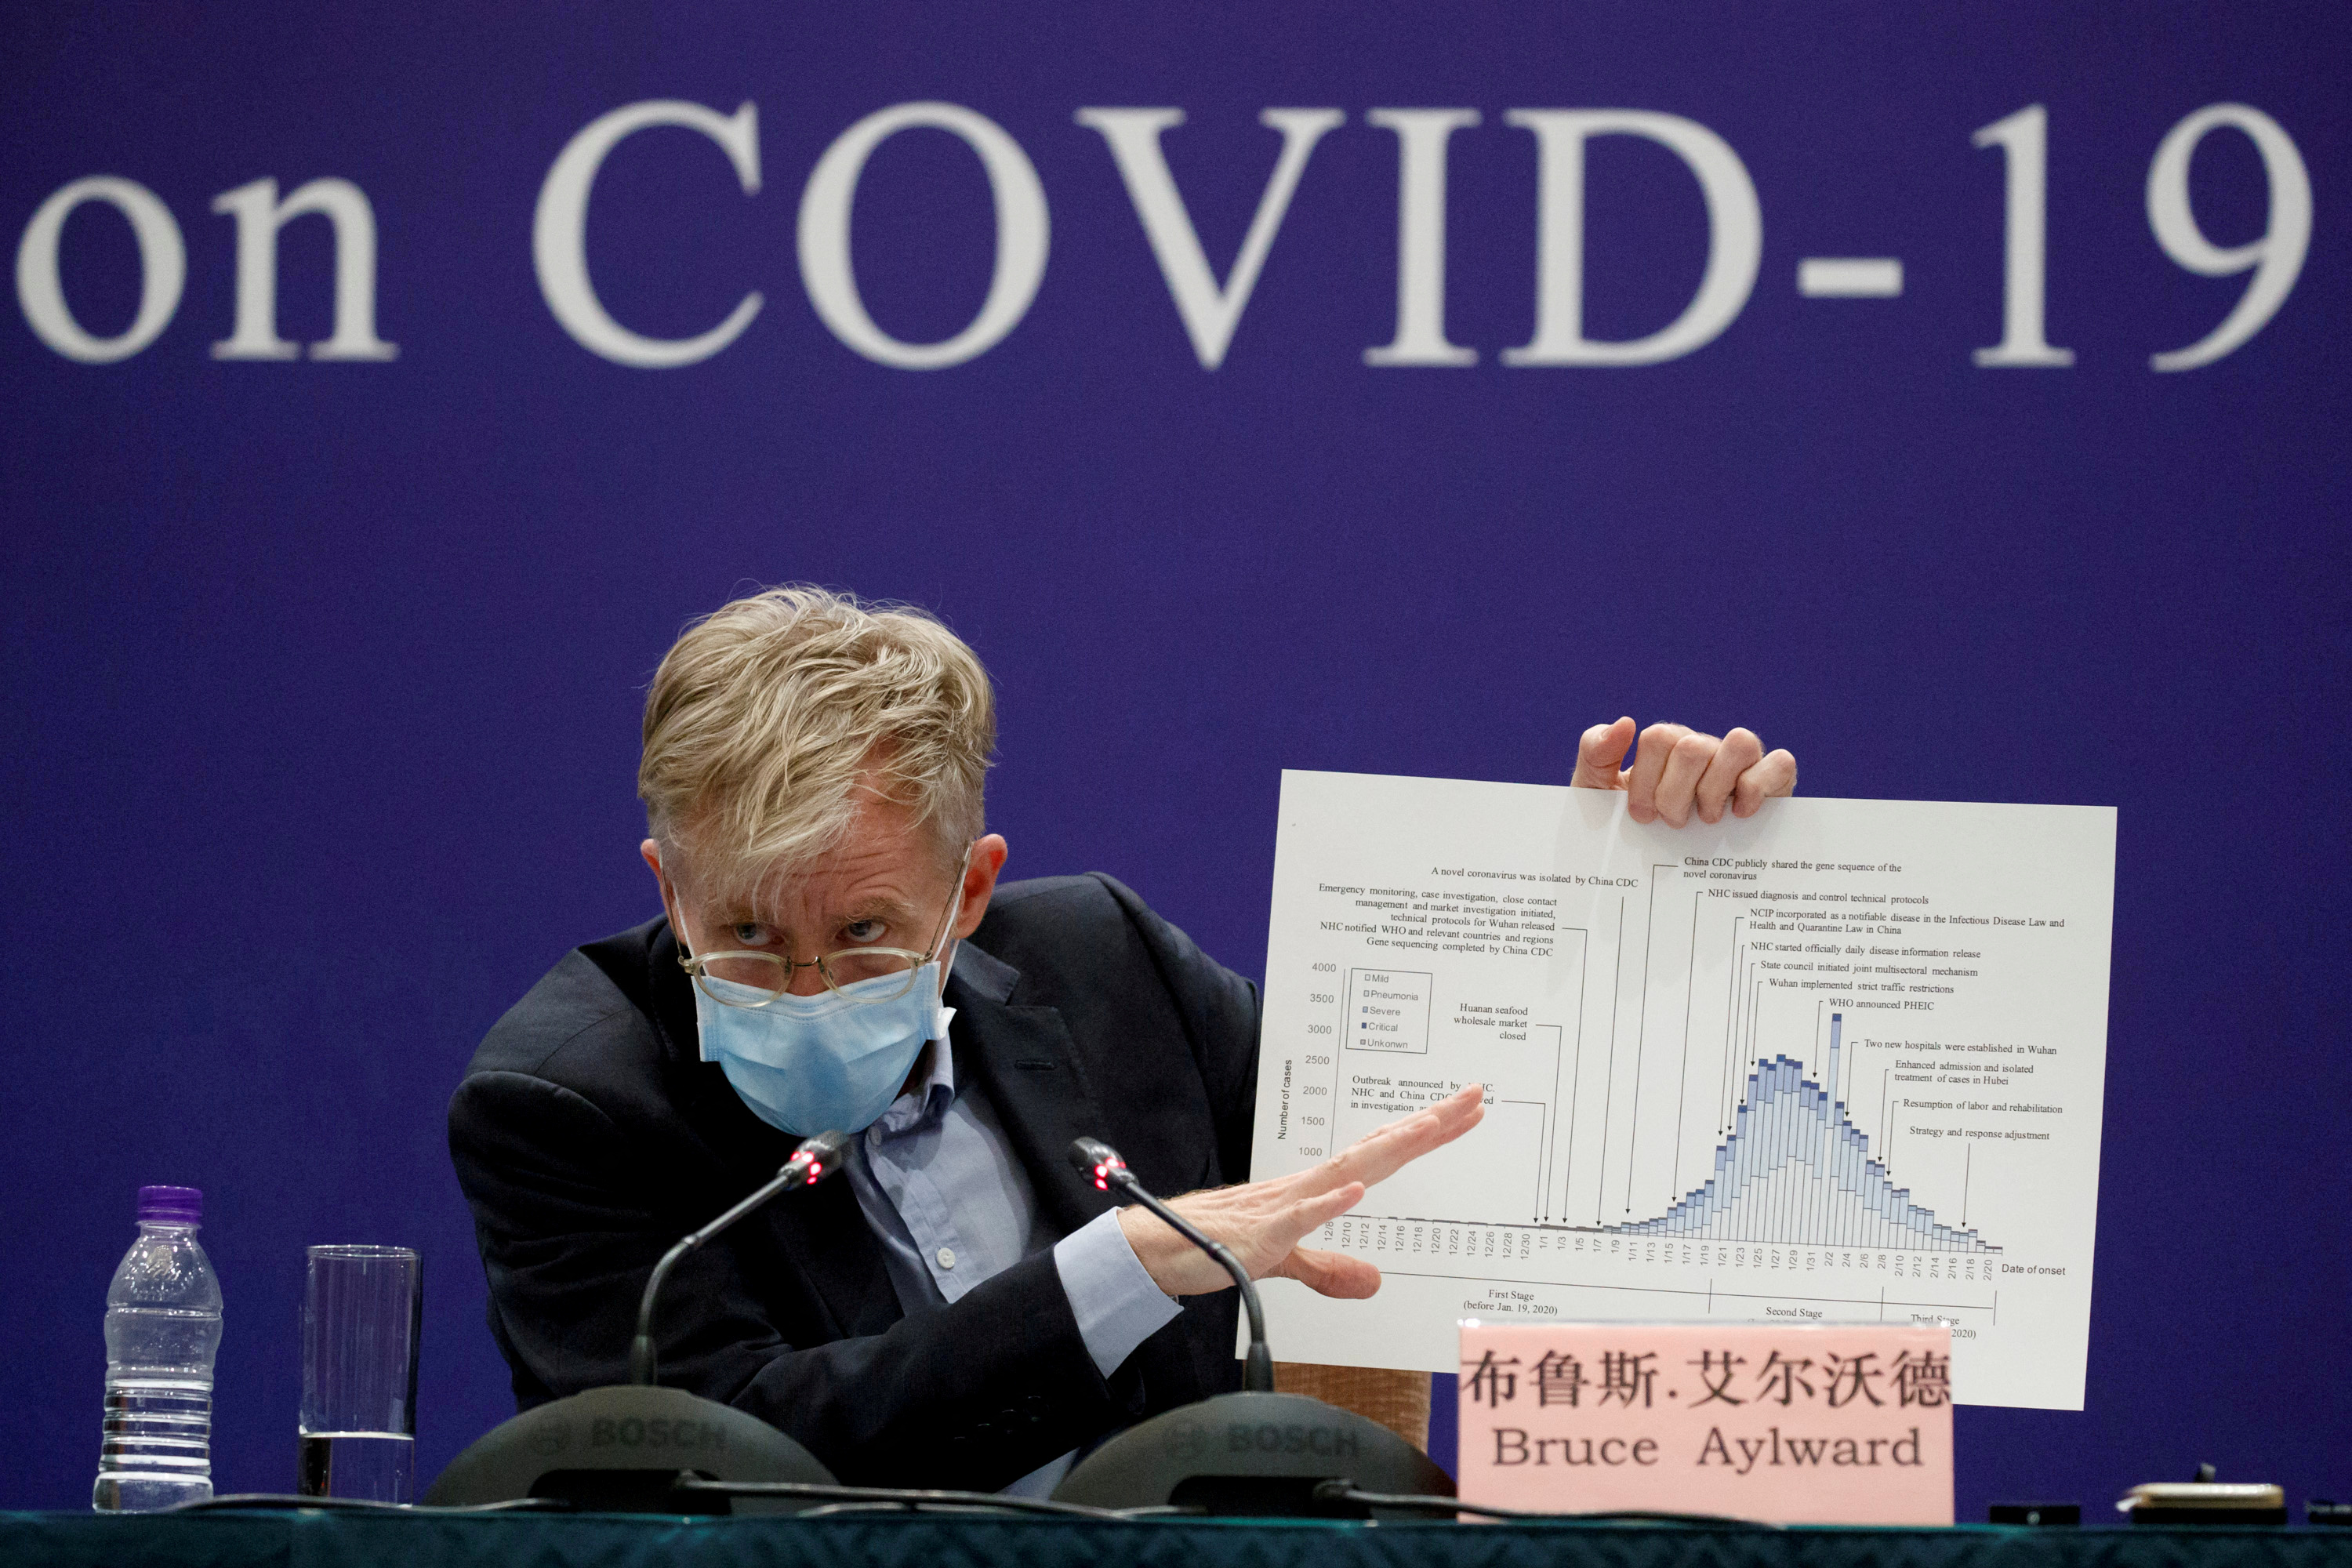 Bruce Aylward of the World Health Organization (WHO) holds up a chart during a news conference given by the WHO-China Joint Mission on COVID-19 about its investigation of the coronavirus outbreak in Beijing, China, February 24, 2020. REUTERS/Thomas Peter